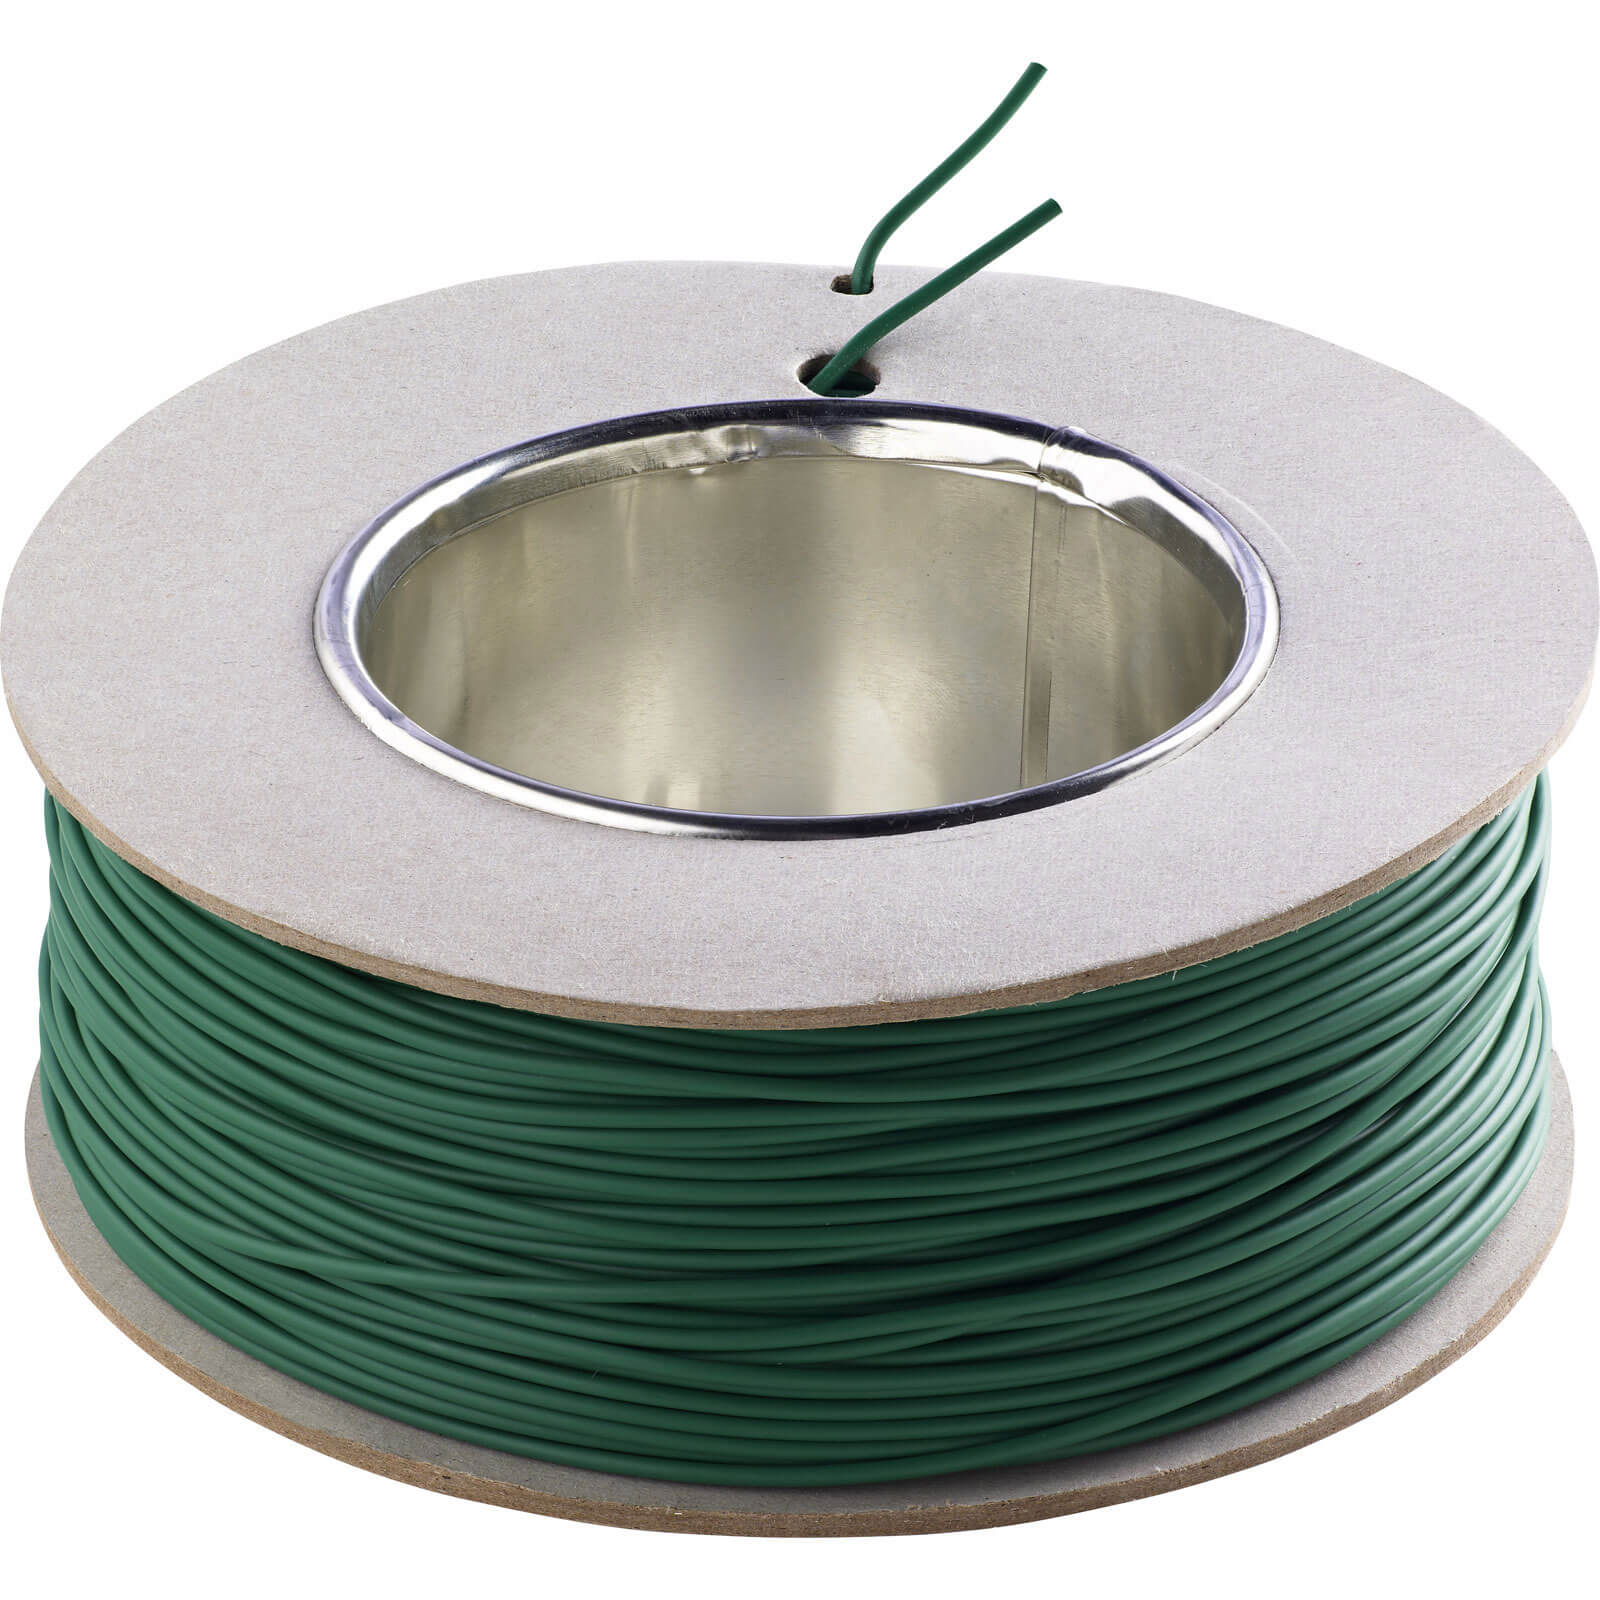 Bosch 100 Metre Perimeter Wire for Indego Robotic Lawn Mowers